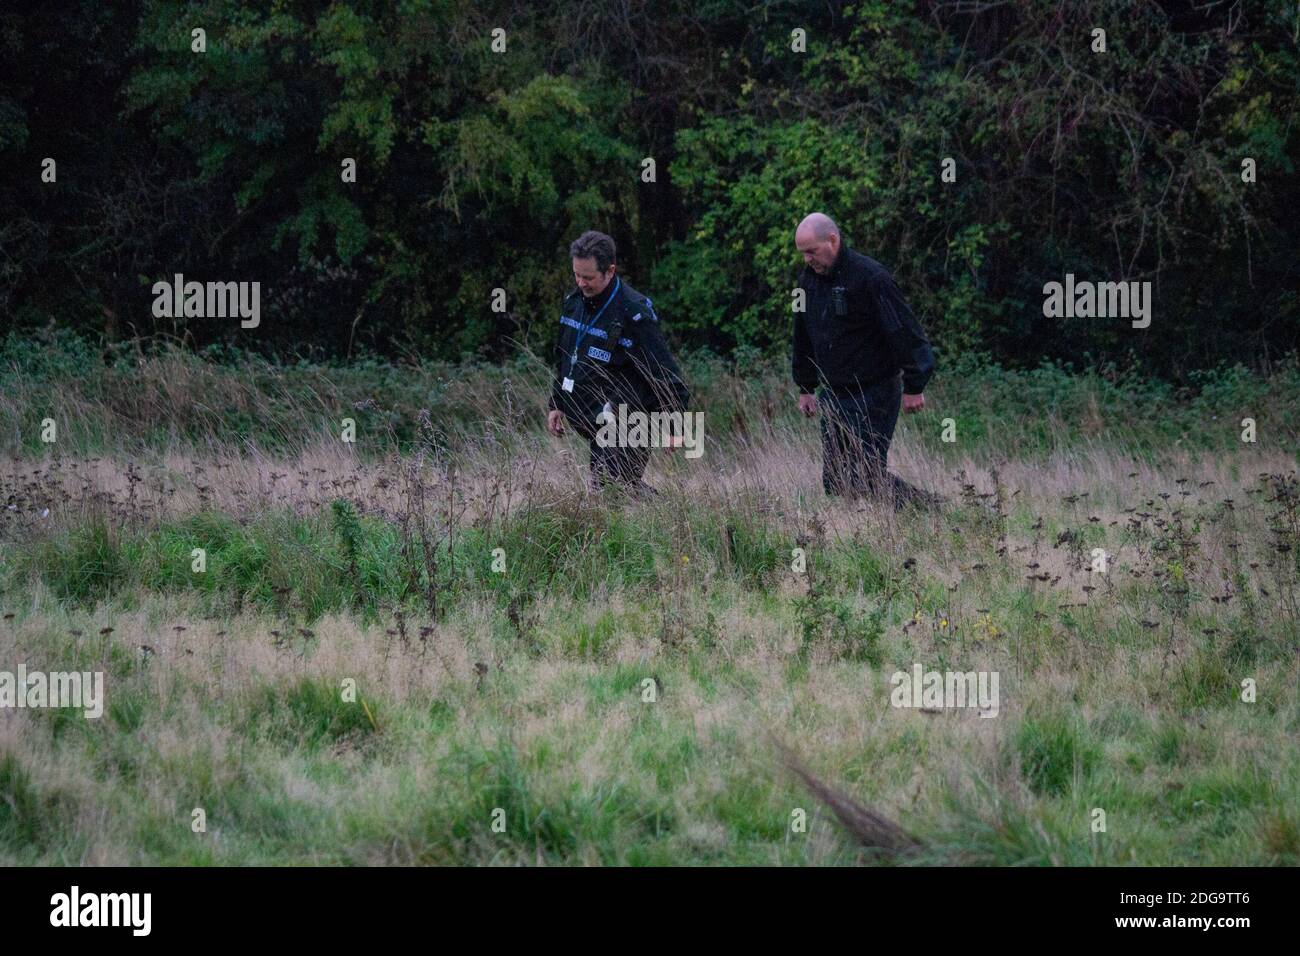 Specialist officers from West Midlands Police wading through the overgrowth on Newbold Comyn, where a woman's body was found Thursday 29th October. Anthony Russell, 38, was later charged with murder along with two others who were killed in Coventry earlier in the year. Stock Photo